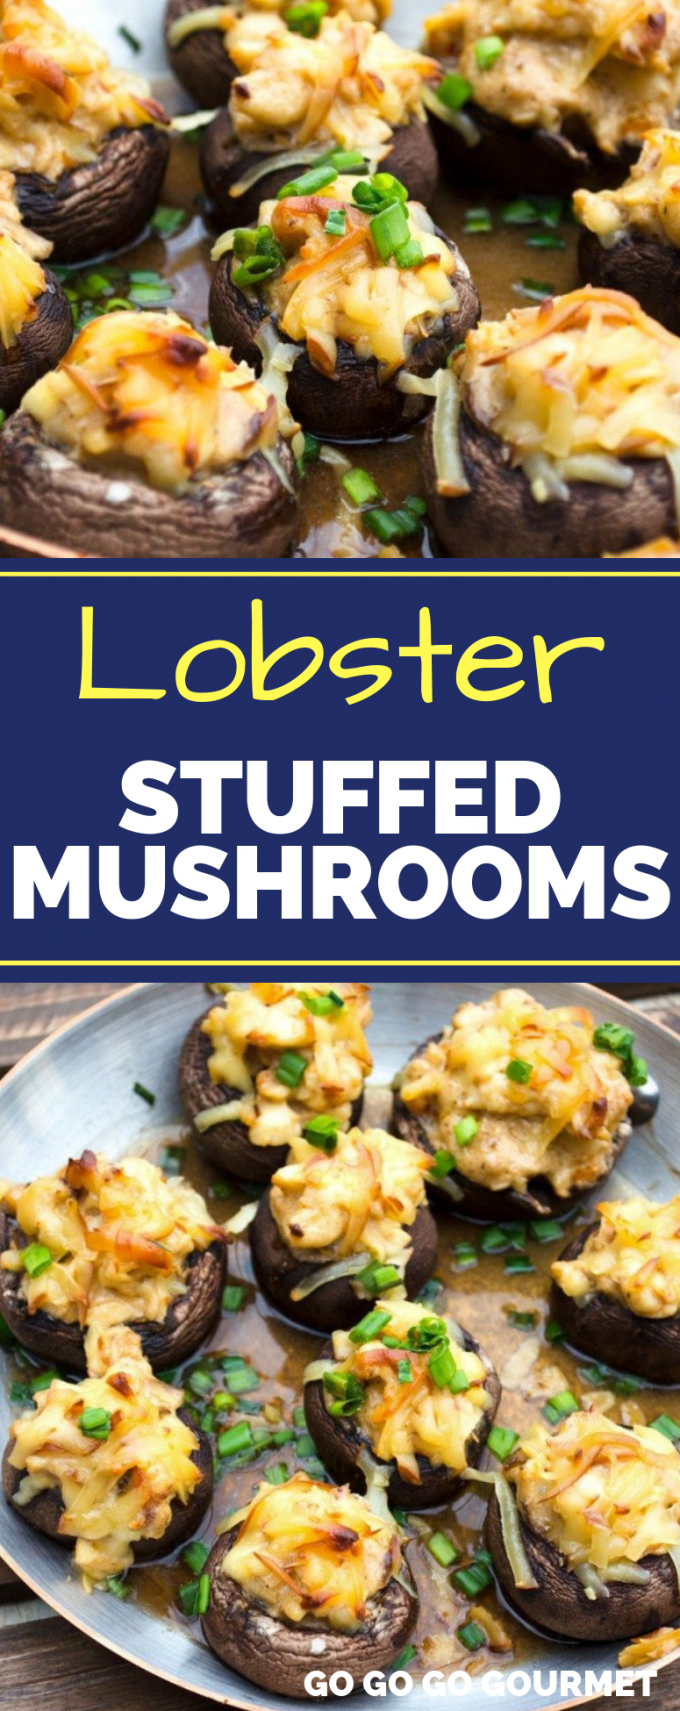 If you like Red Lobster's stuffed mushrooms, you are going to love this easy Lobster Stuffed Mushrooms recipe! While the cream cheese doesn't make them very healthy, they're perfect for serving as an appetizer for dinner or even around the holidays! #gogogogourmet #lobsterstuffedmushrooms #stuffedmushrooms #lobsterrecipes via @gogogogourmet